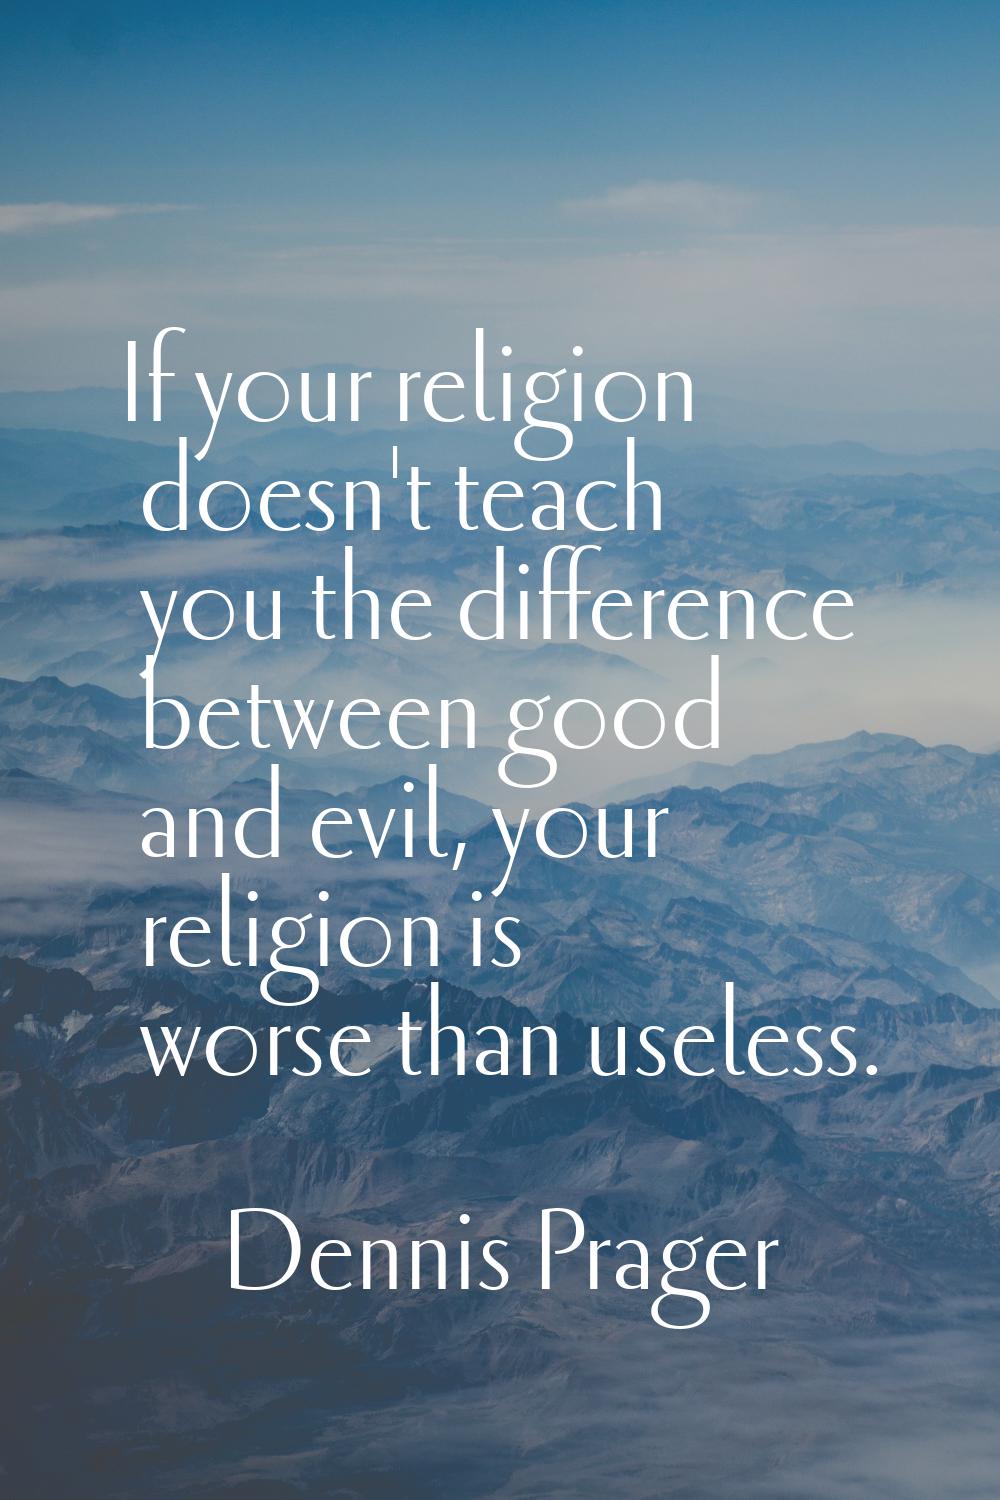 If your religion doesn't teach you the difference between good and evil, your religion is worse tha